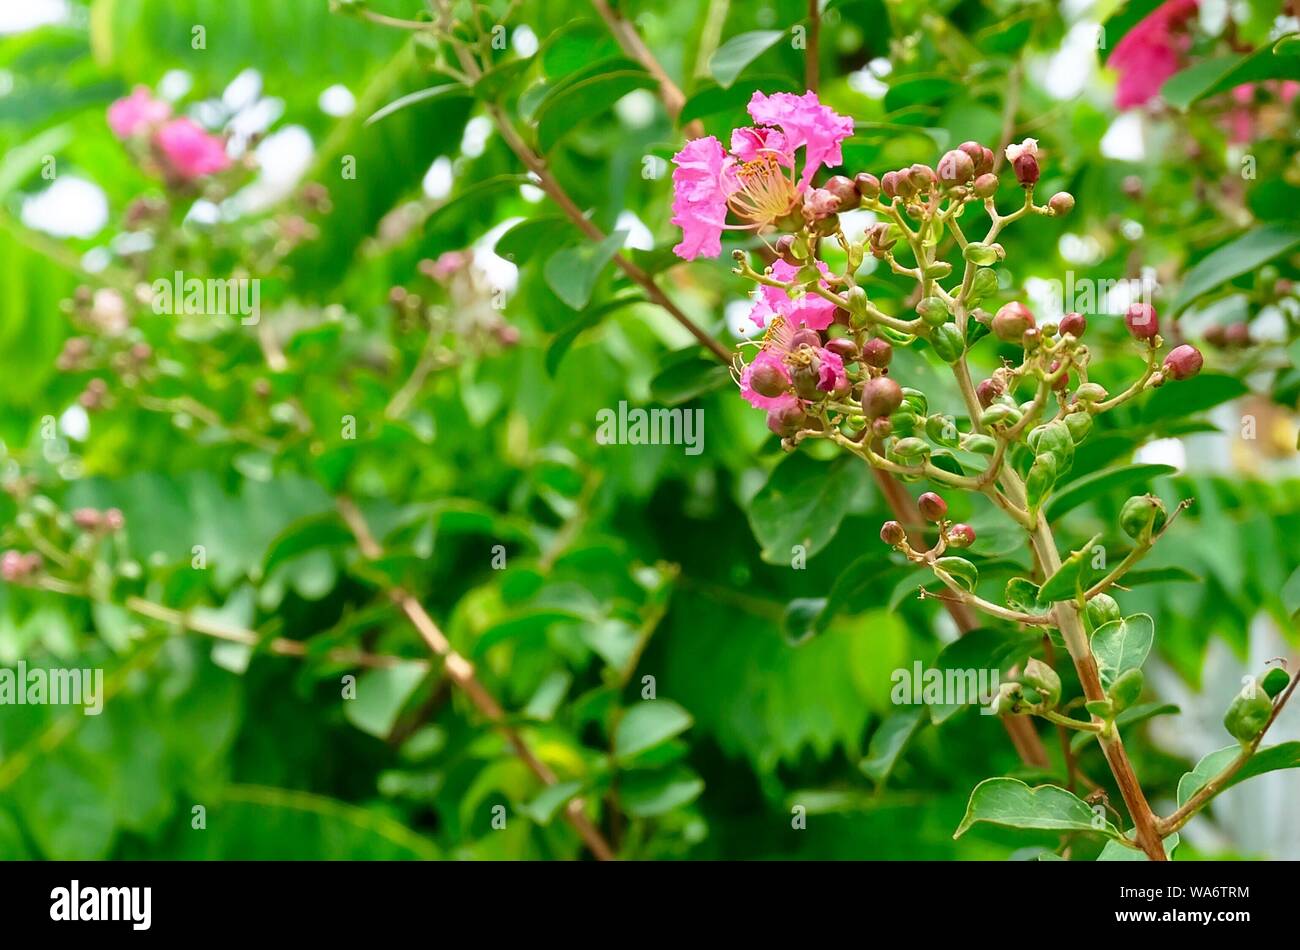 Bunch of Tropical Pink Chain of Love or Mexican Creeper Flowers Blooming on The Green Tree. Stock Photo